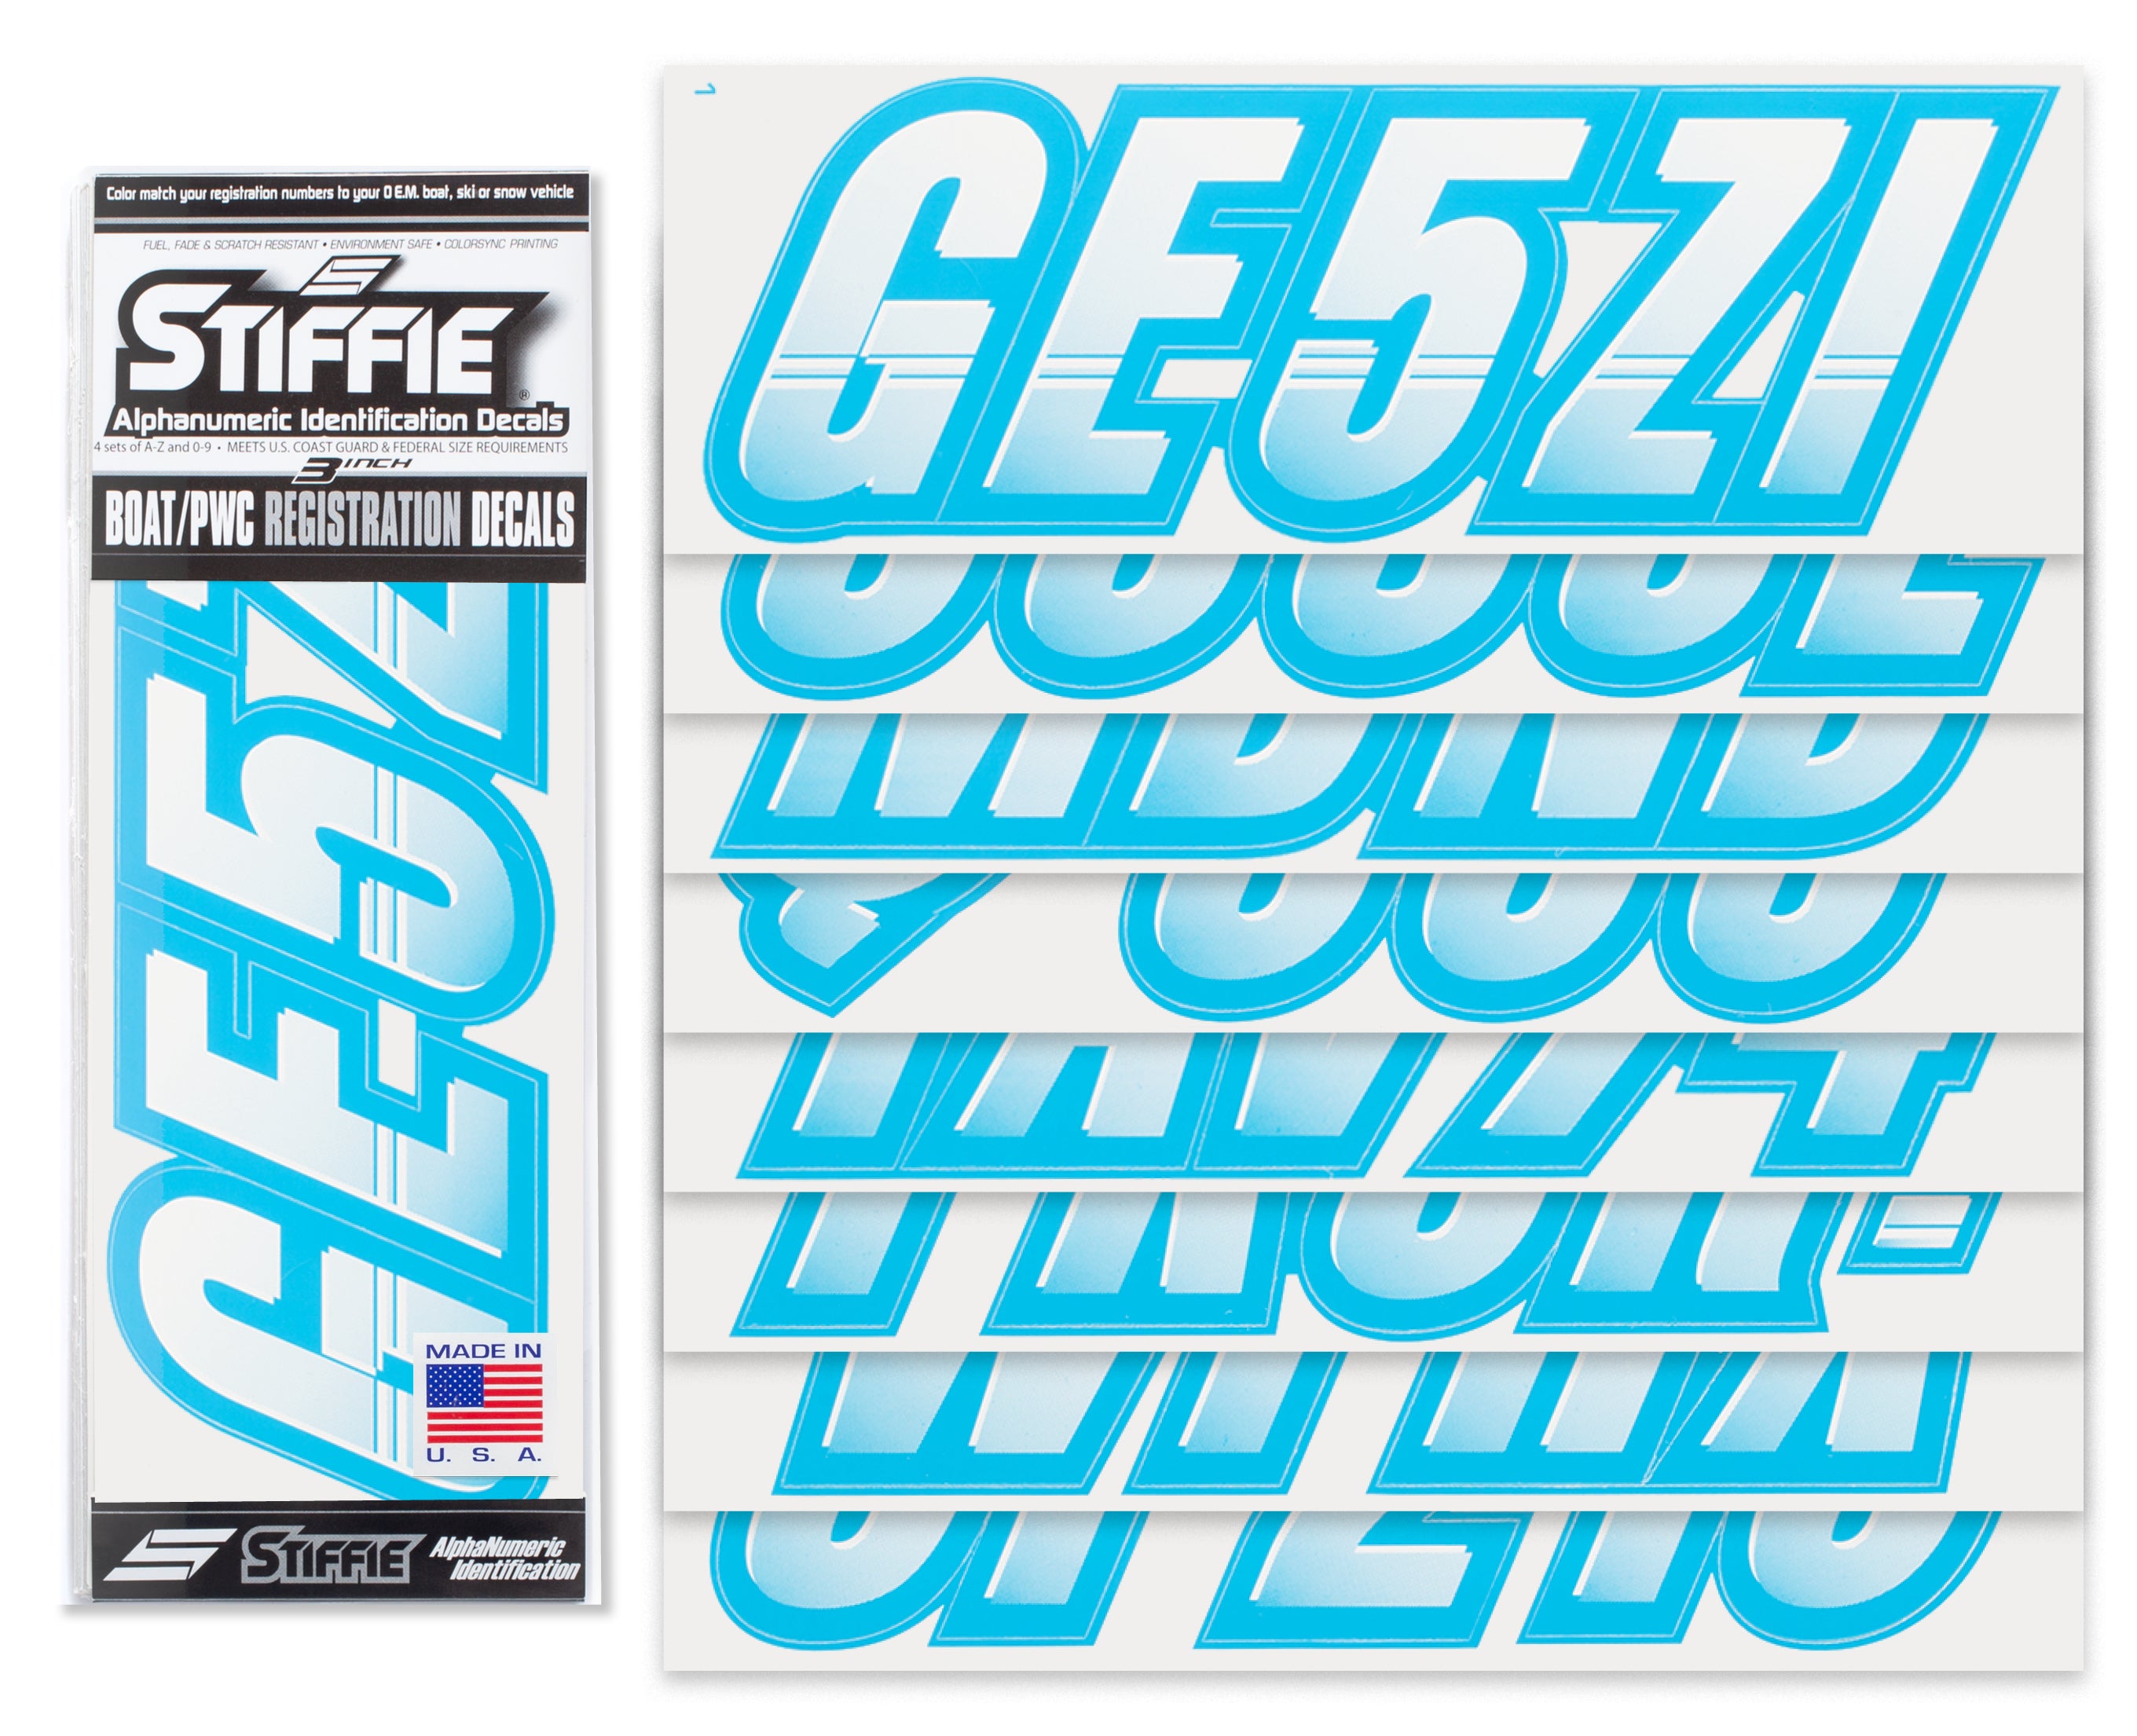 Stiffie Techtron White/Sky Blue 3" Alpha-Numeric Registration Identification Numbers Stickers Decals for Boats & Personal Watercraft